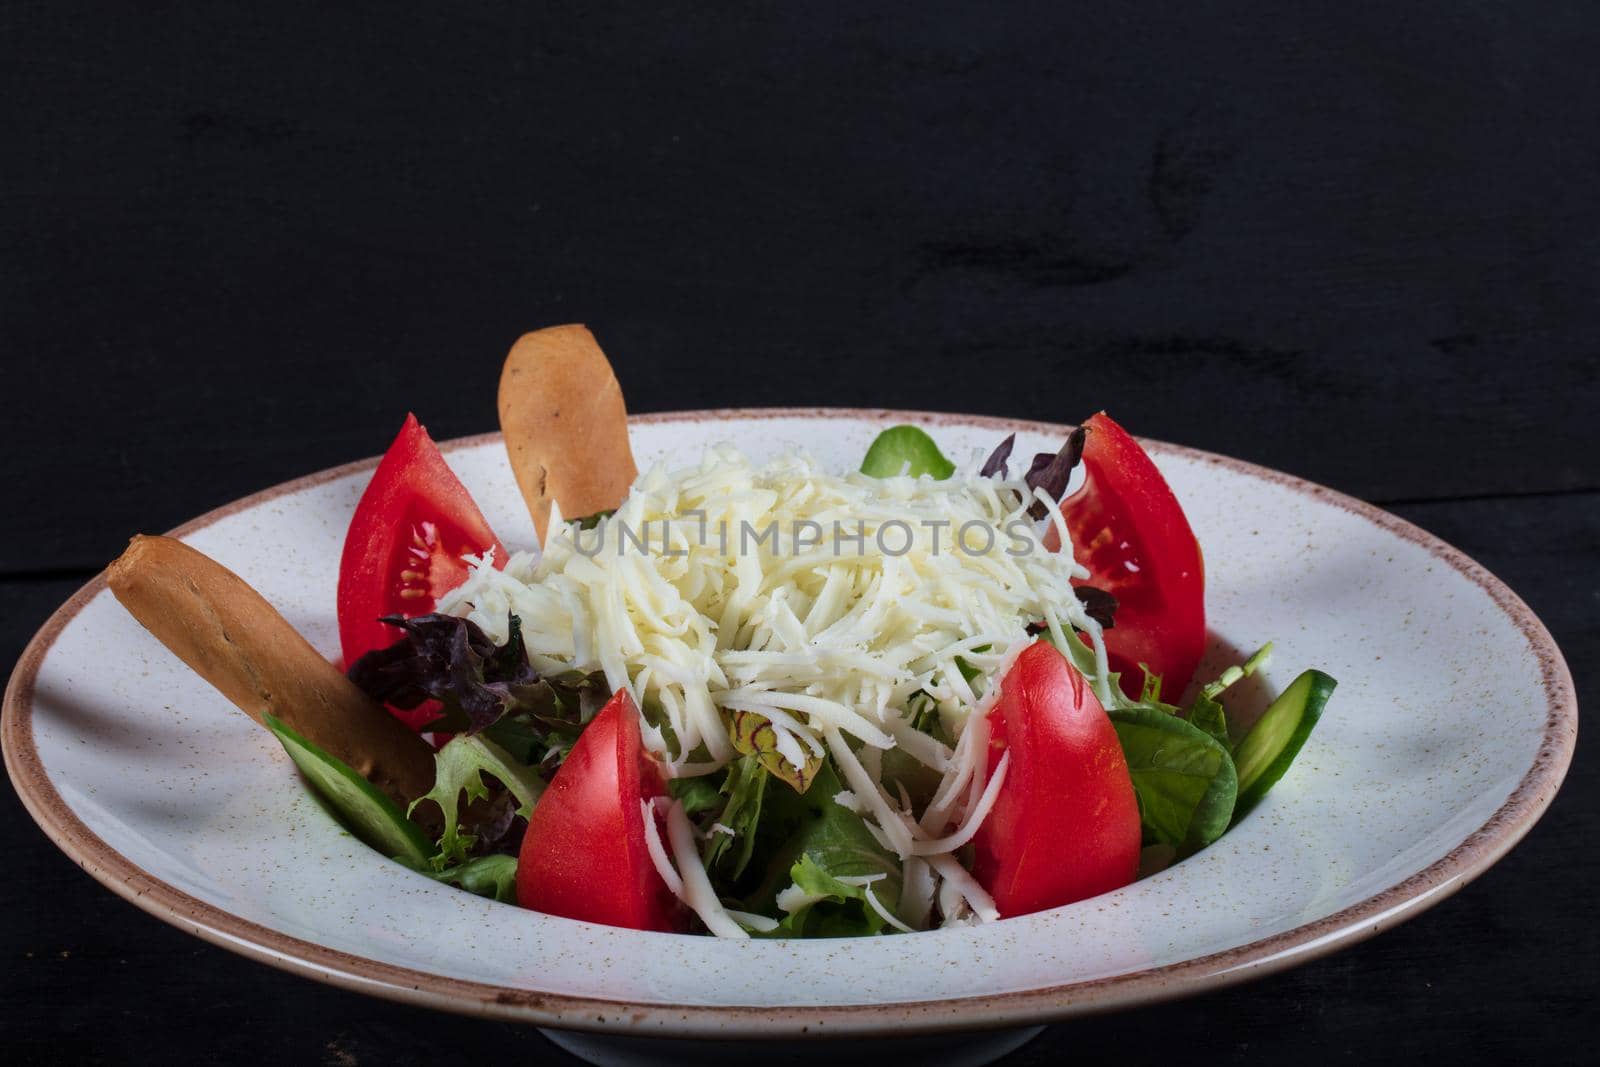 healthy eating, dieting, vegetarian kitchen and cooking concept - close up of vegetable salad bowl at home by senkaya